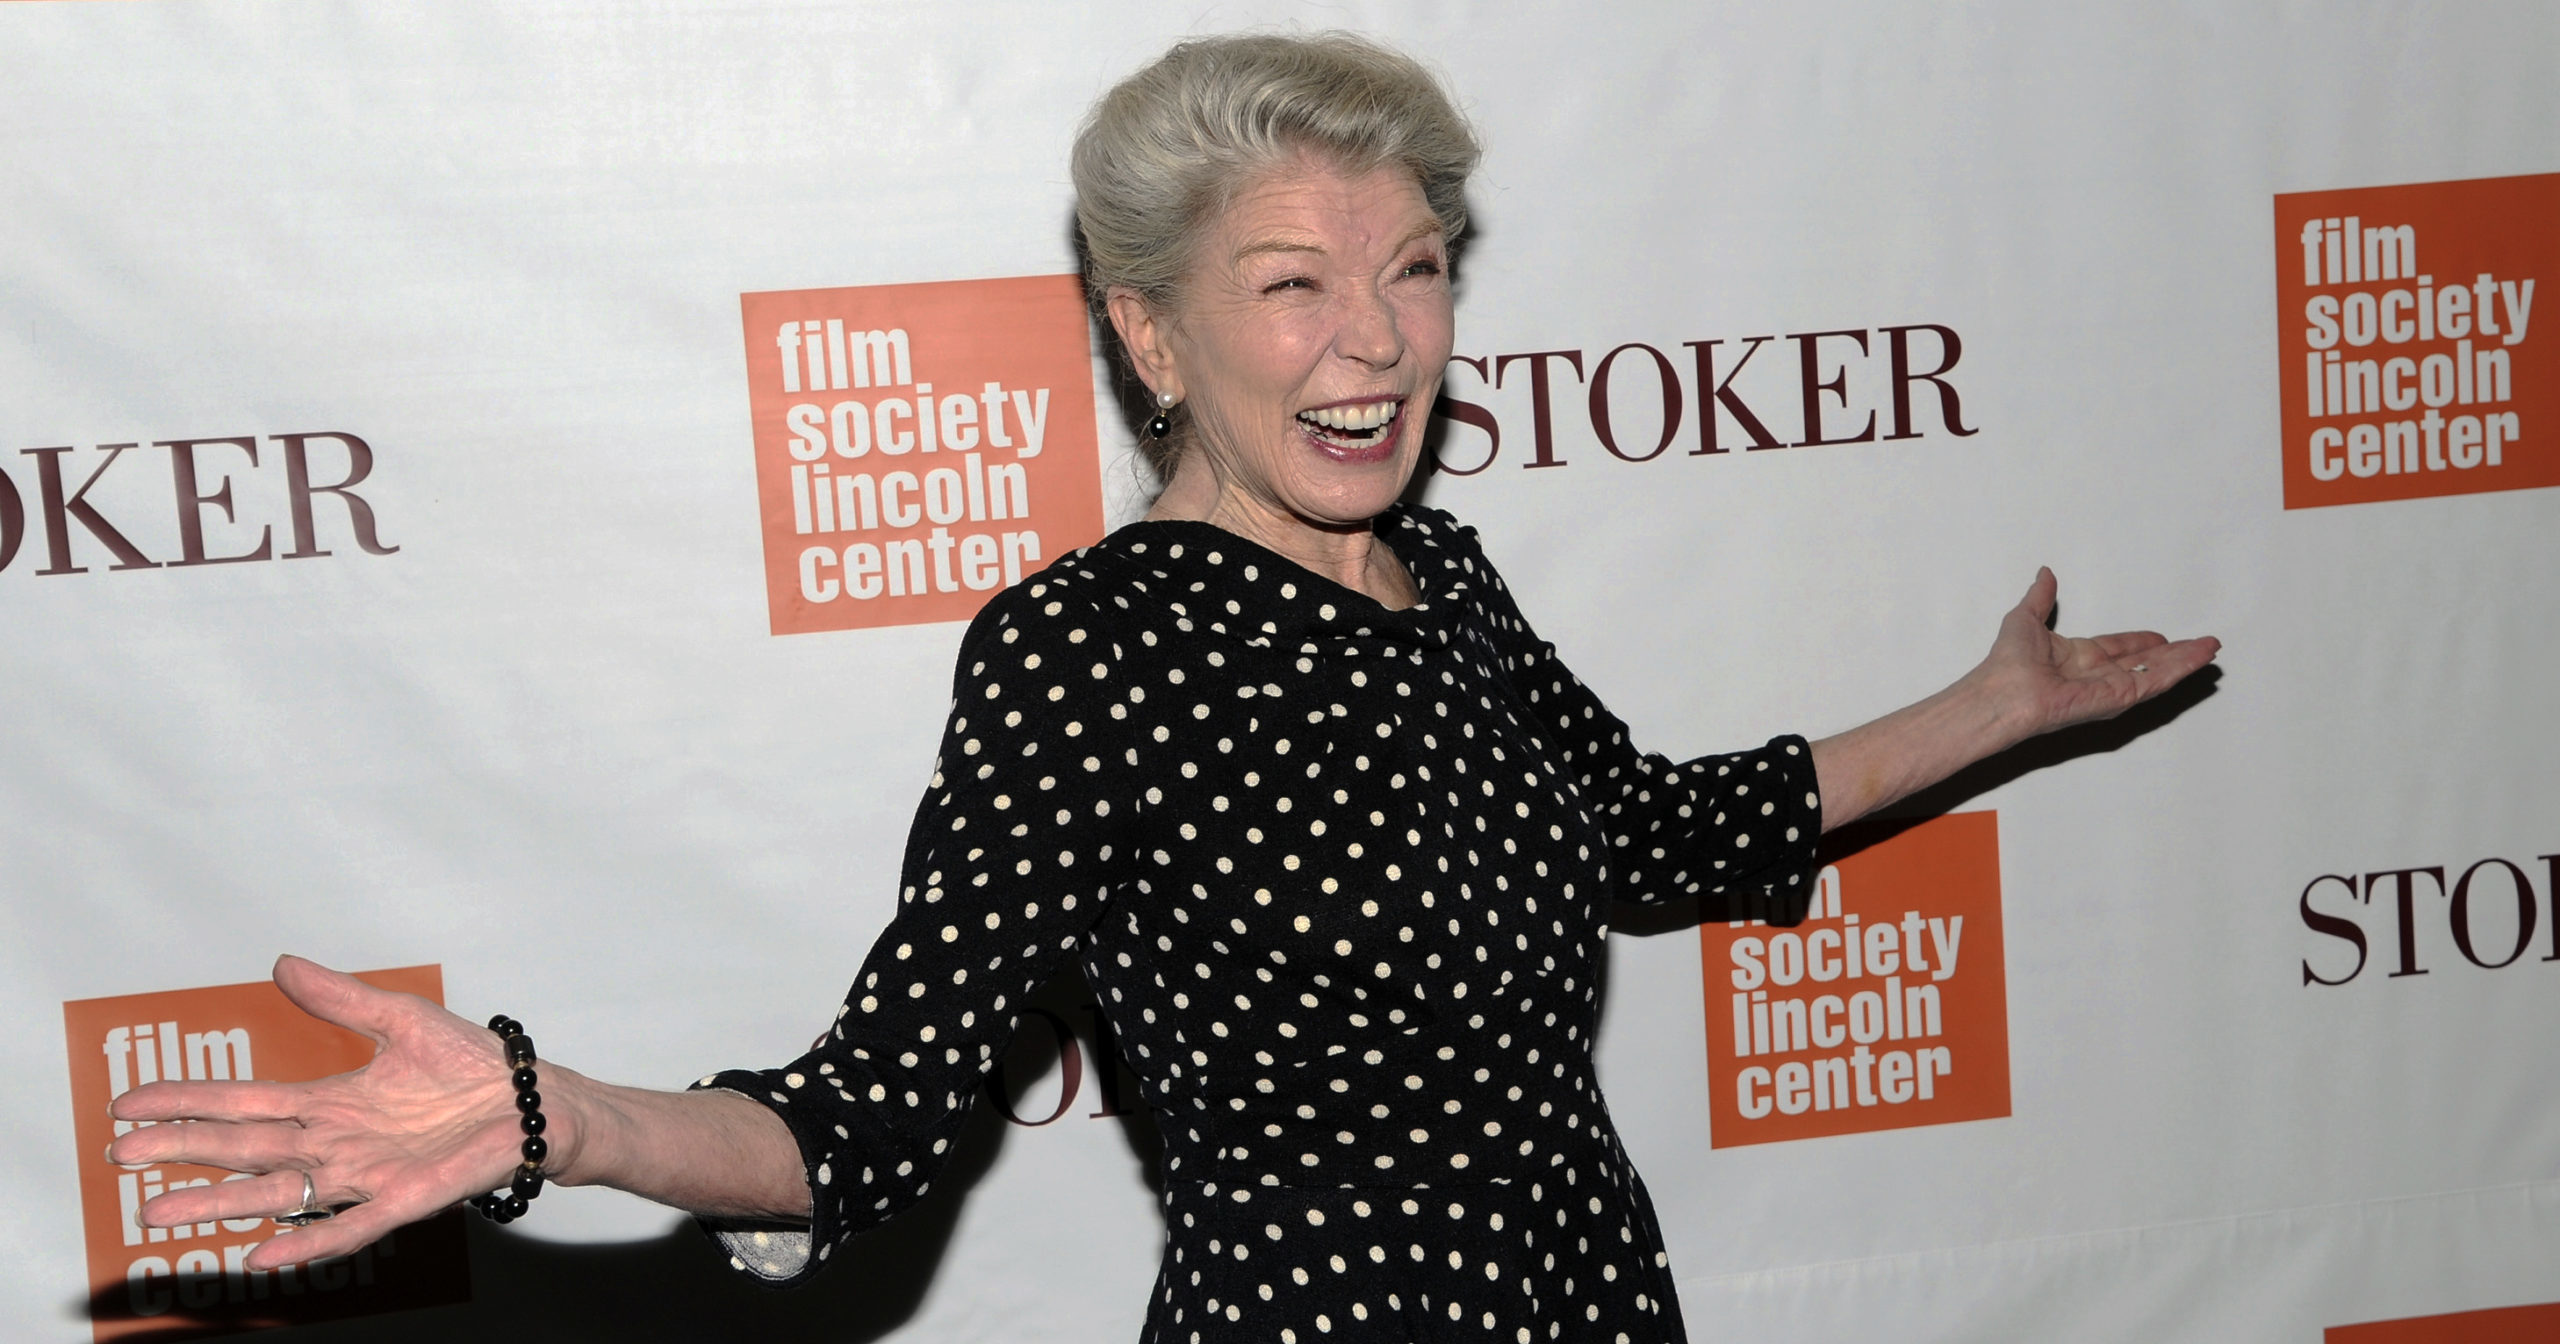 In this Feb. 27, 2013, file photo, actress Phyllis Somerville attends the premiere of "Stoker" at Walter Reade Theatre in New York. Somerville, an actress with a variety of credits in films, television shows and Broadway productions over her lengthy career, has died. She was 76.